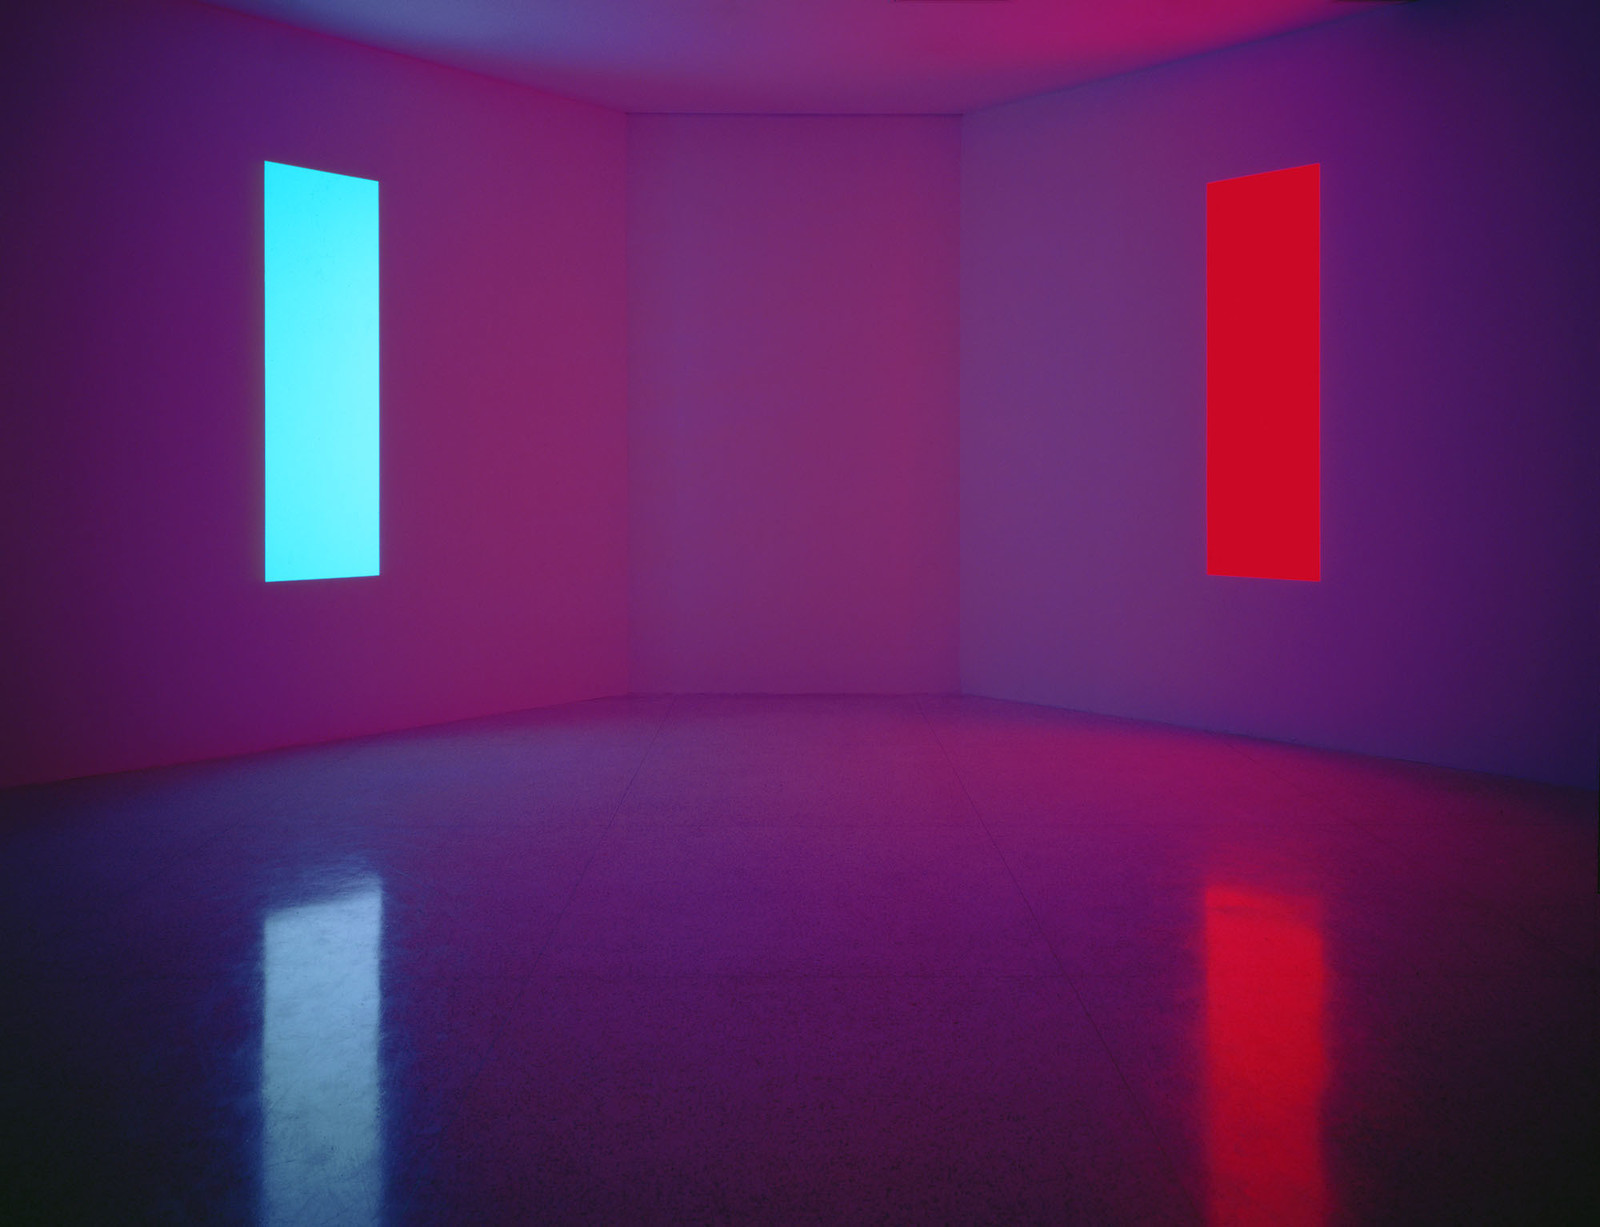 James Turrell. Stuck Red and Stuck Blue. 1970. Construction materials and fluorescent lights. 83.82 х 101.6 х 83.82 cm. Museum of Contemporary Art San Diego